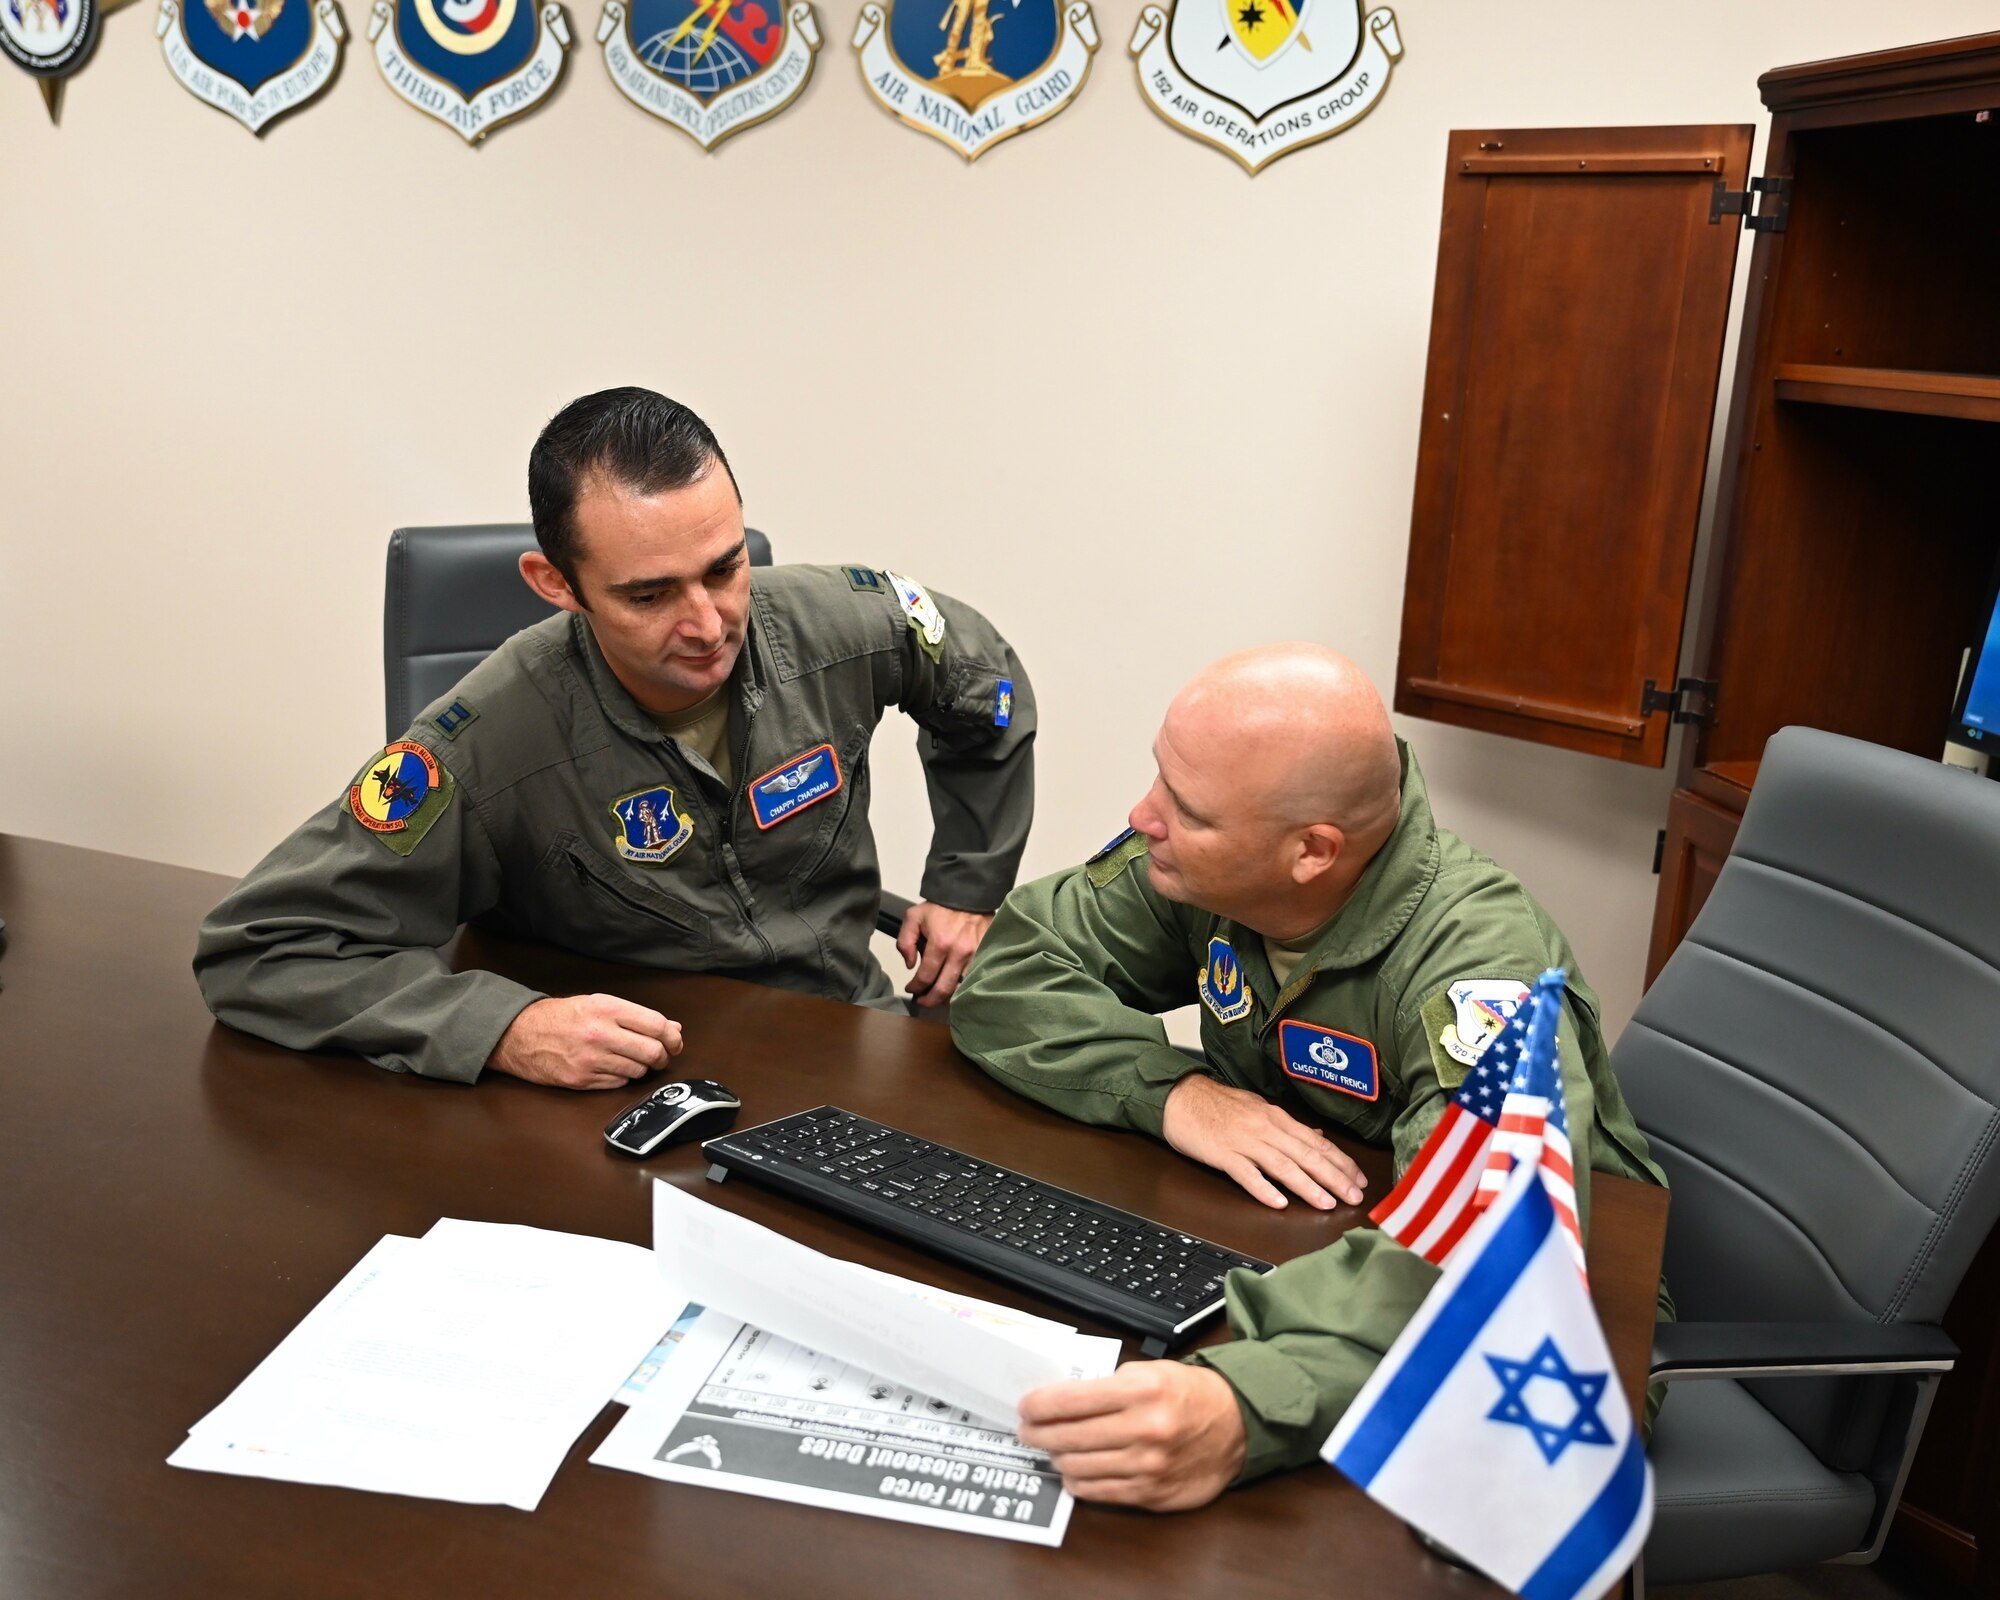 U.S. Air Force Capt Eric Chapman, 152nd Operations Officer and Chief Master Sgt. Toby French, Senior Enlisted Leader 152nd Combat Operations Squadron discuss planning and preparations for the upcoming 2023 JUNIPER exercise in Israel. (U.S. Air National Guard photo by Master Sgt. Barbara Olney)